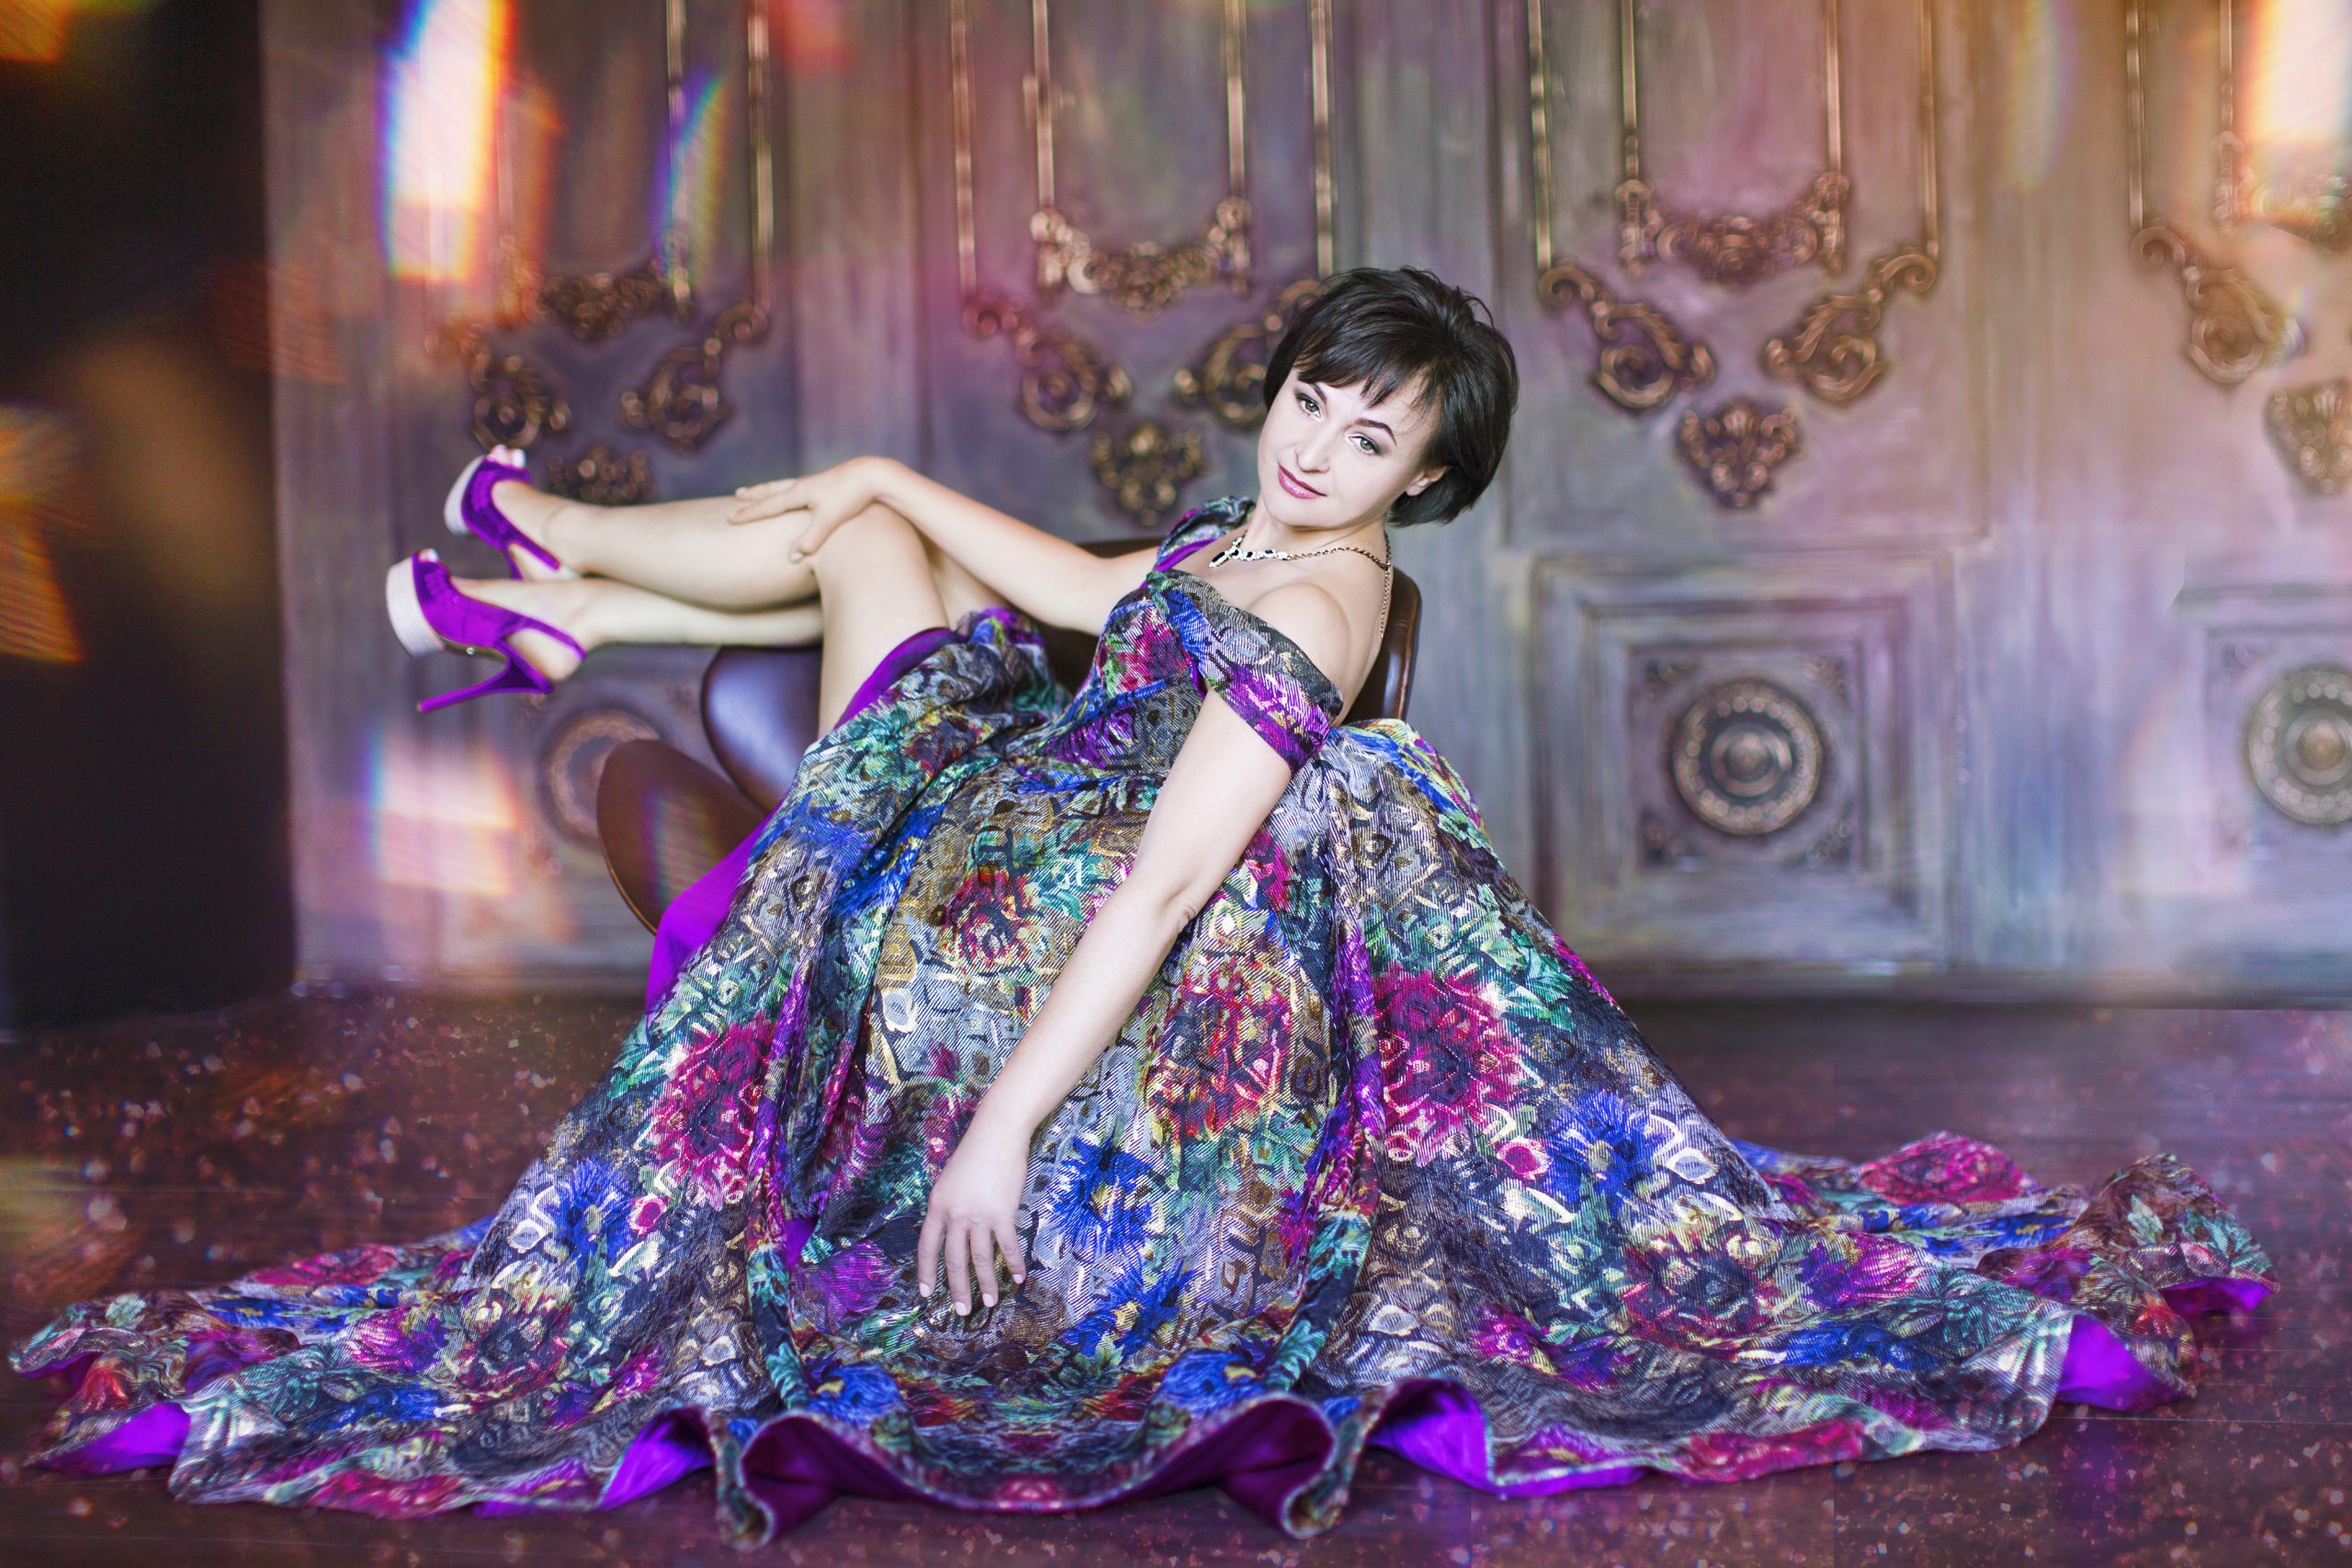 purple fashion design outfits - stock photo model posing on chair wearing ornate purple floral dress